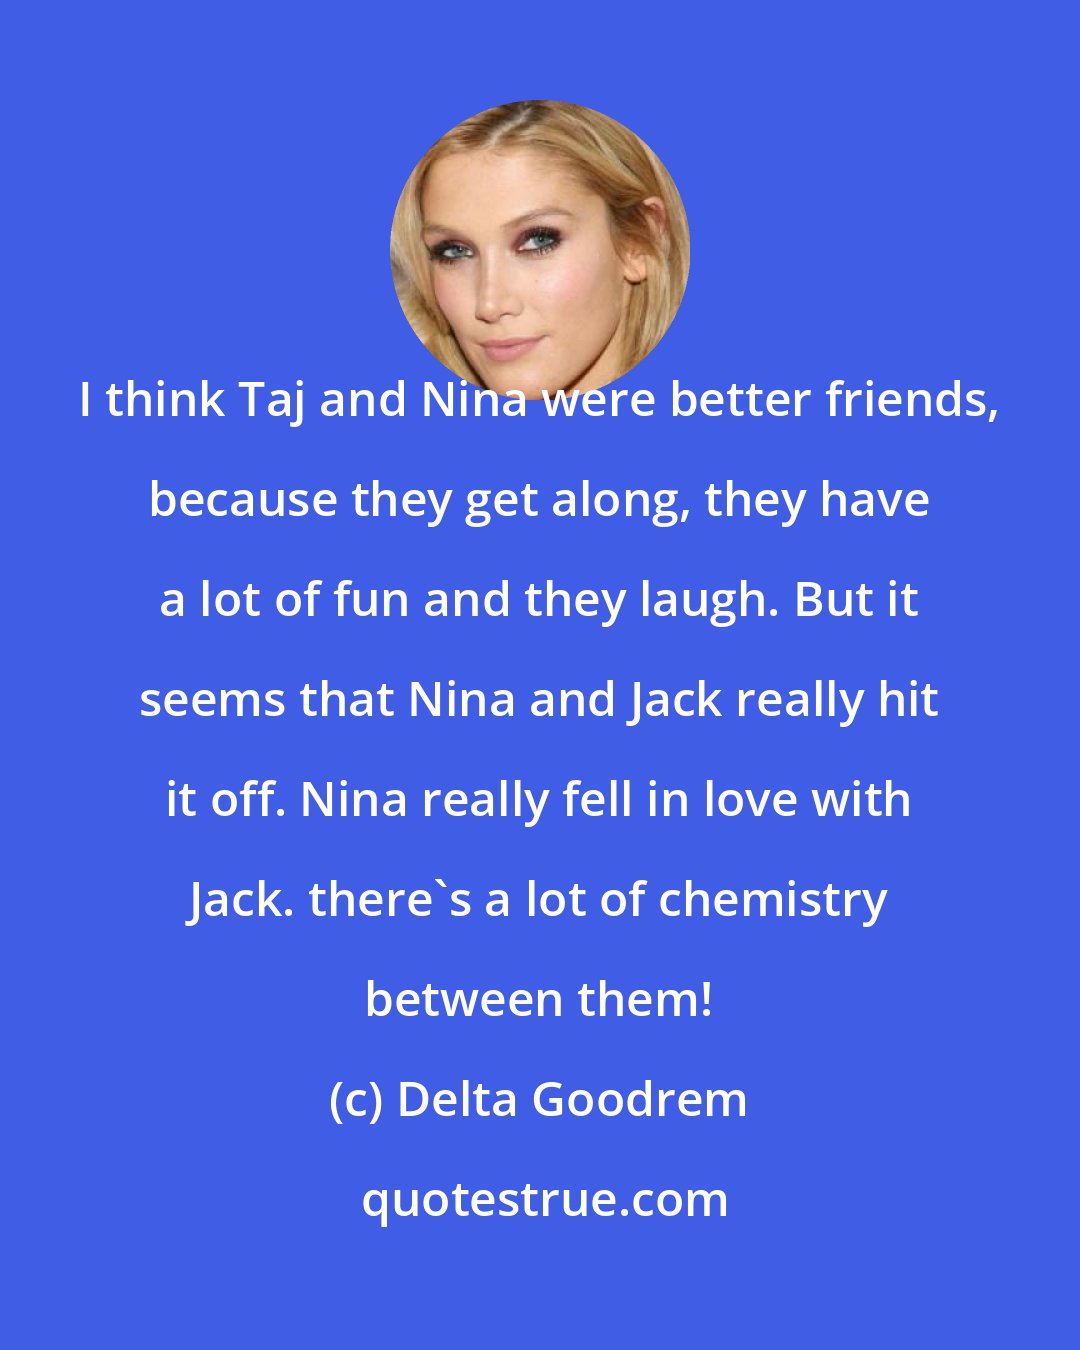 Delta Goodrem: I think Taj and Nina were better friends, because they get along, they have a lot of fun and they laugh. But it seems that Nina and Jack really hit it off. Nina really fell in love with Jack. there's a lot of chemistry between them!